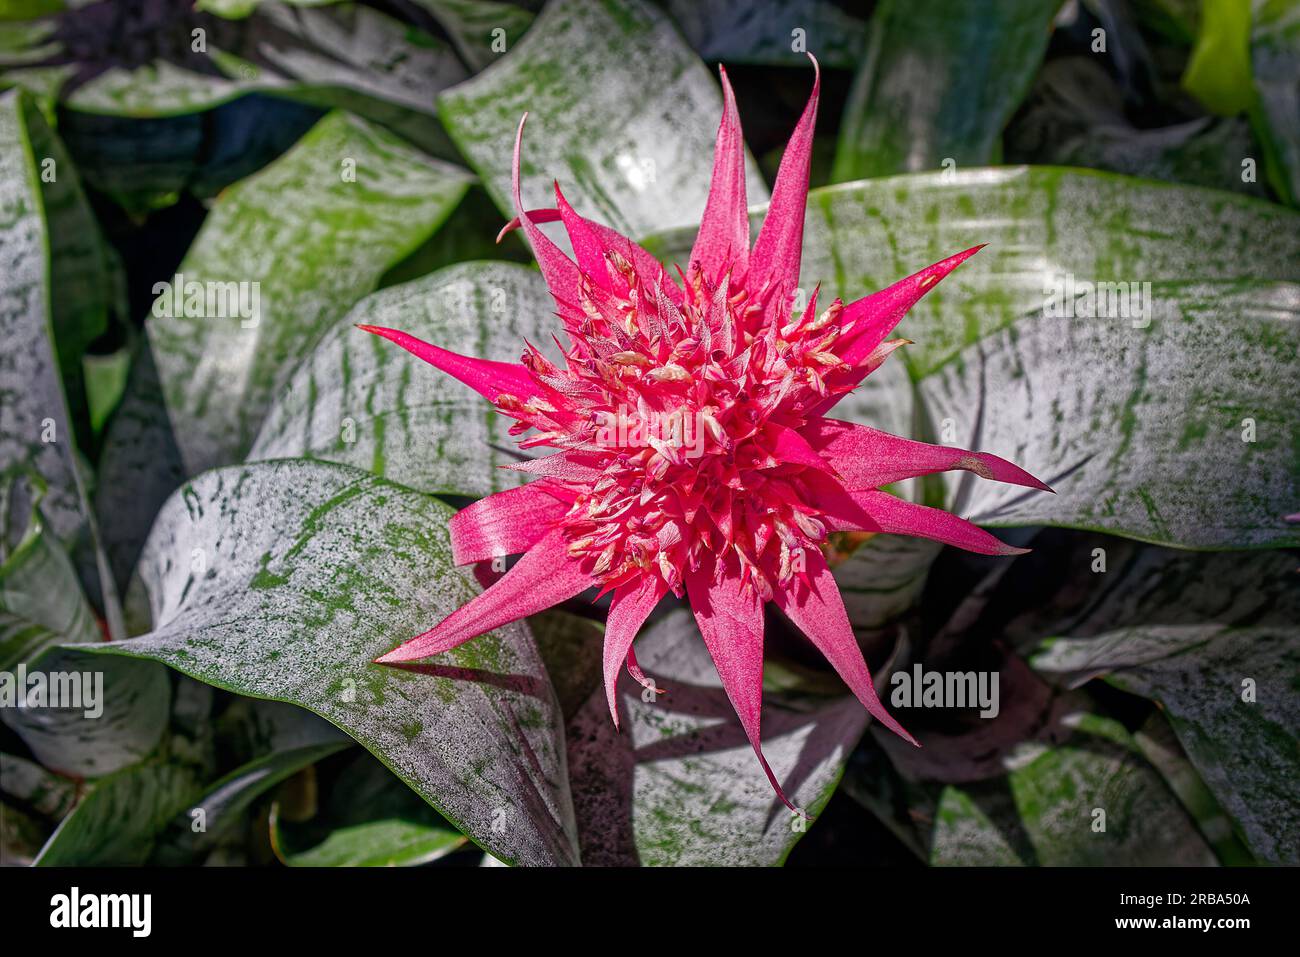 bromeliad, rose color flower, tropical plant, leathery leaves, close-up, long lasting blossom, nature Stock Photo